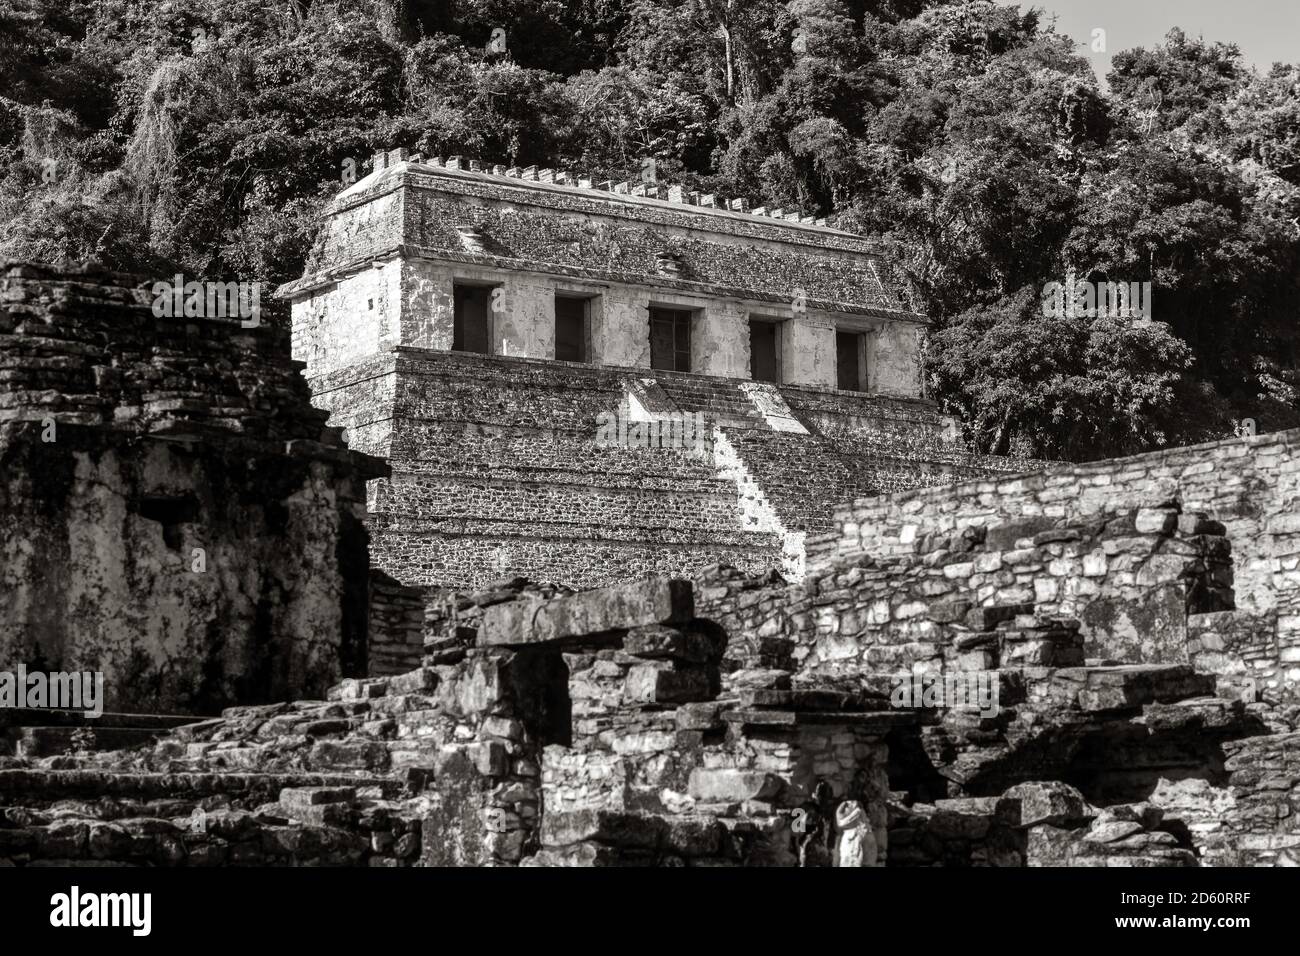 Maya Temple of Inscriptions in black and white, Palenque, Chiapas rainforest, Mexico. Stock Photo